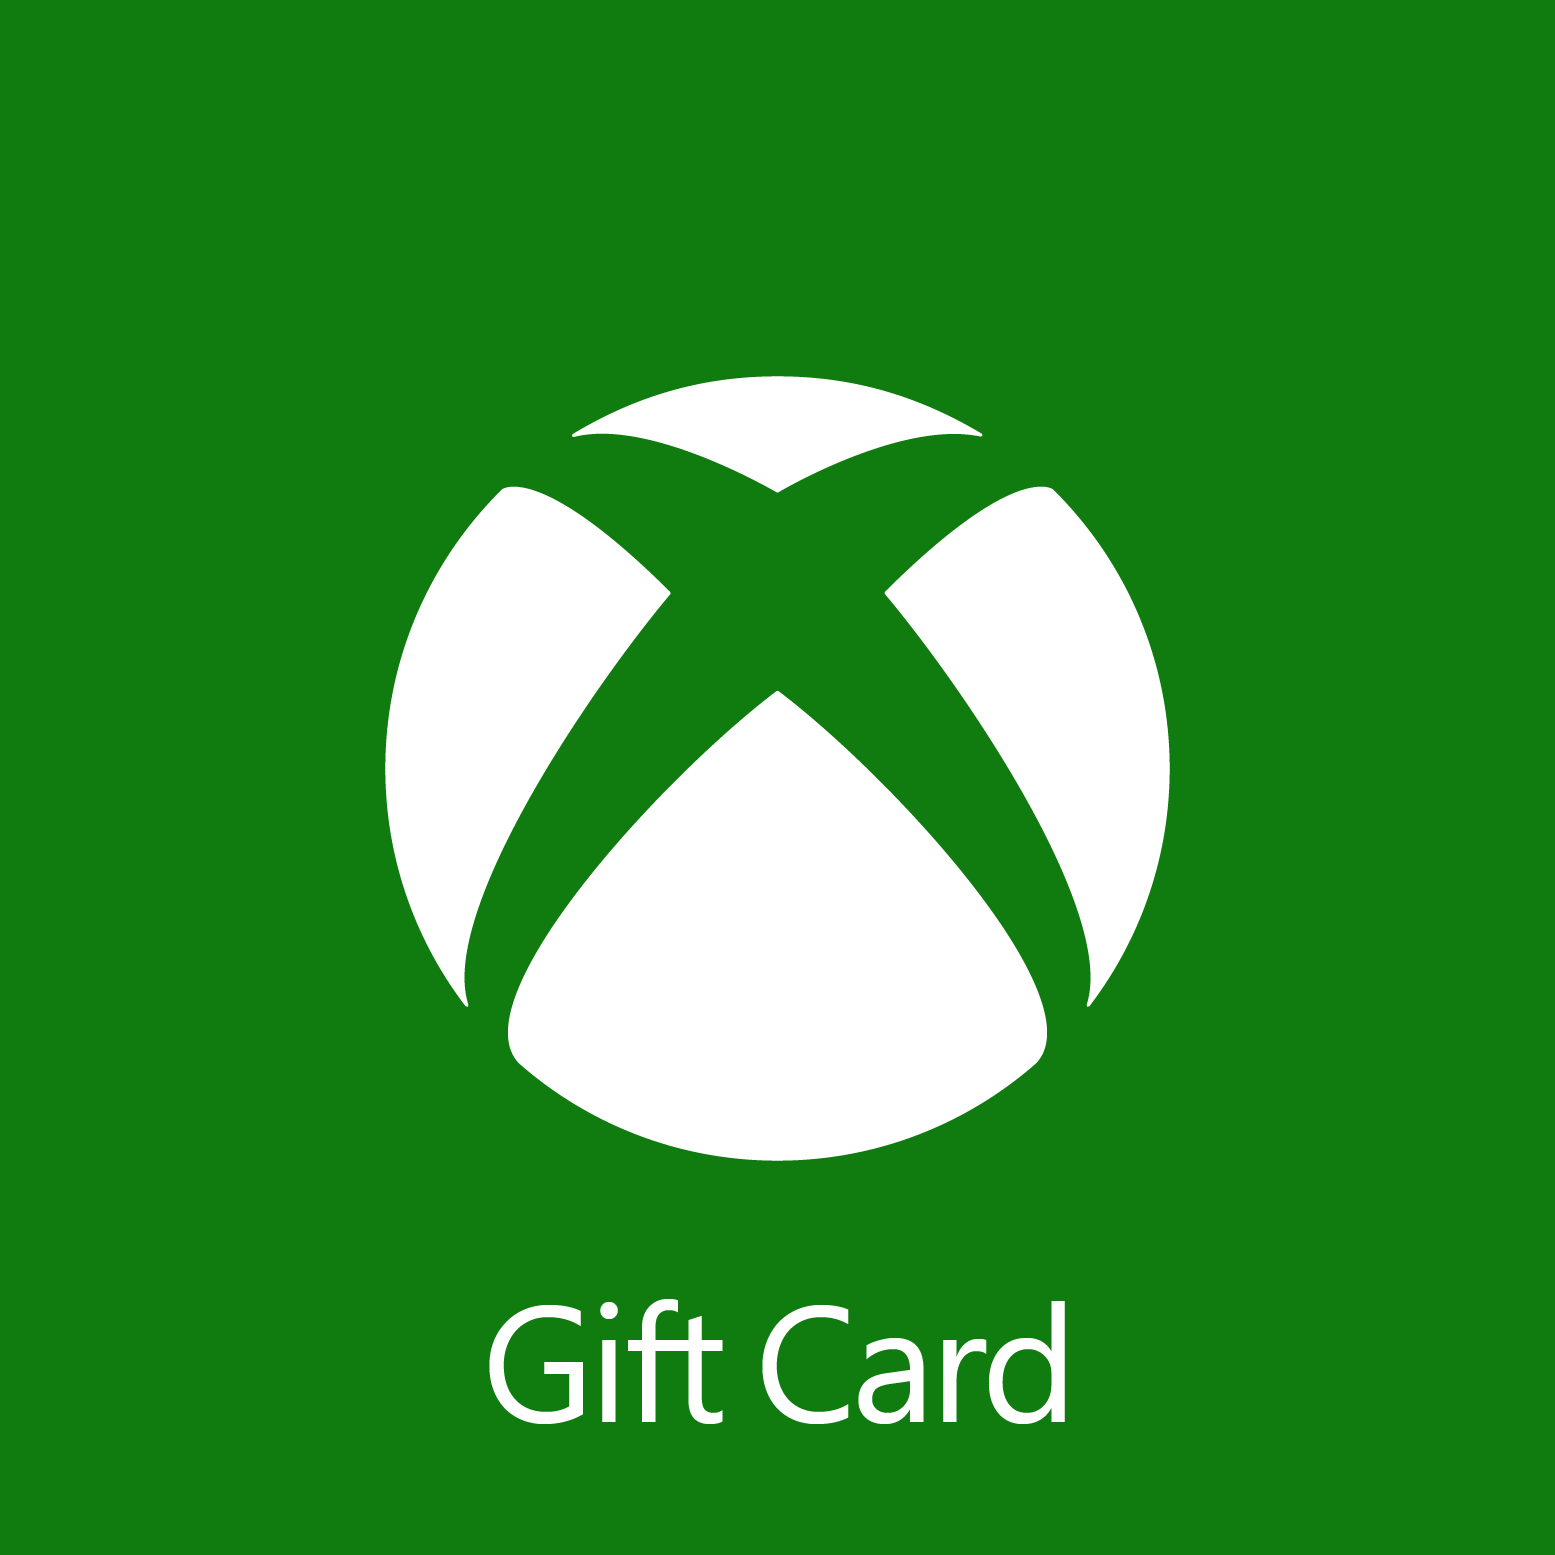 gift cards for online games